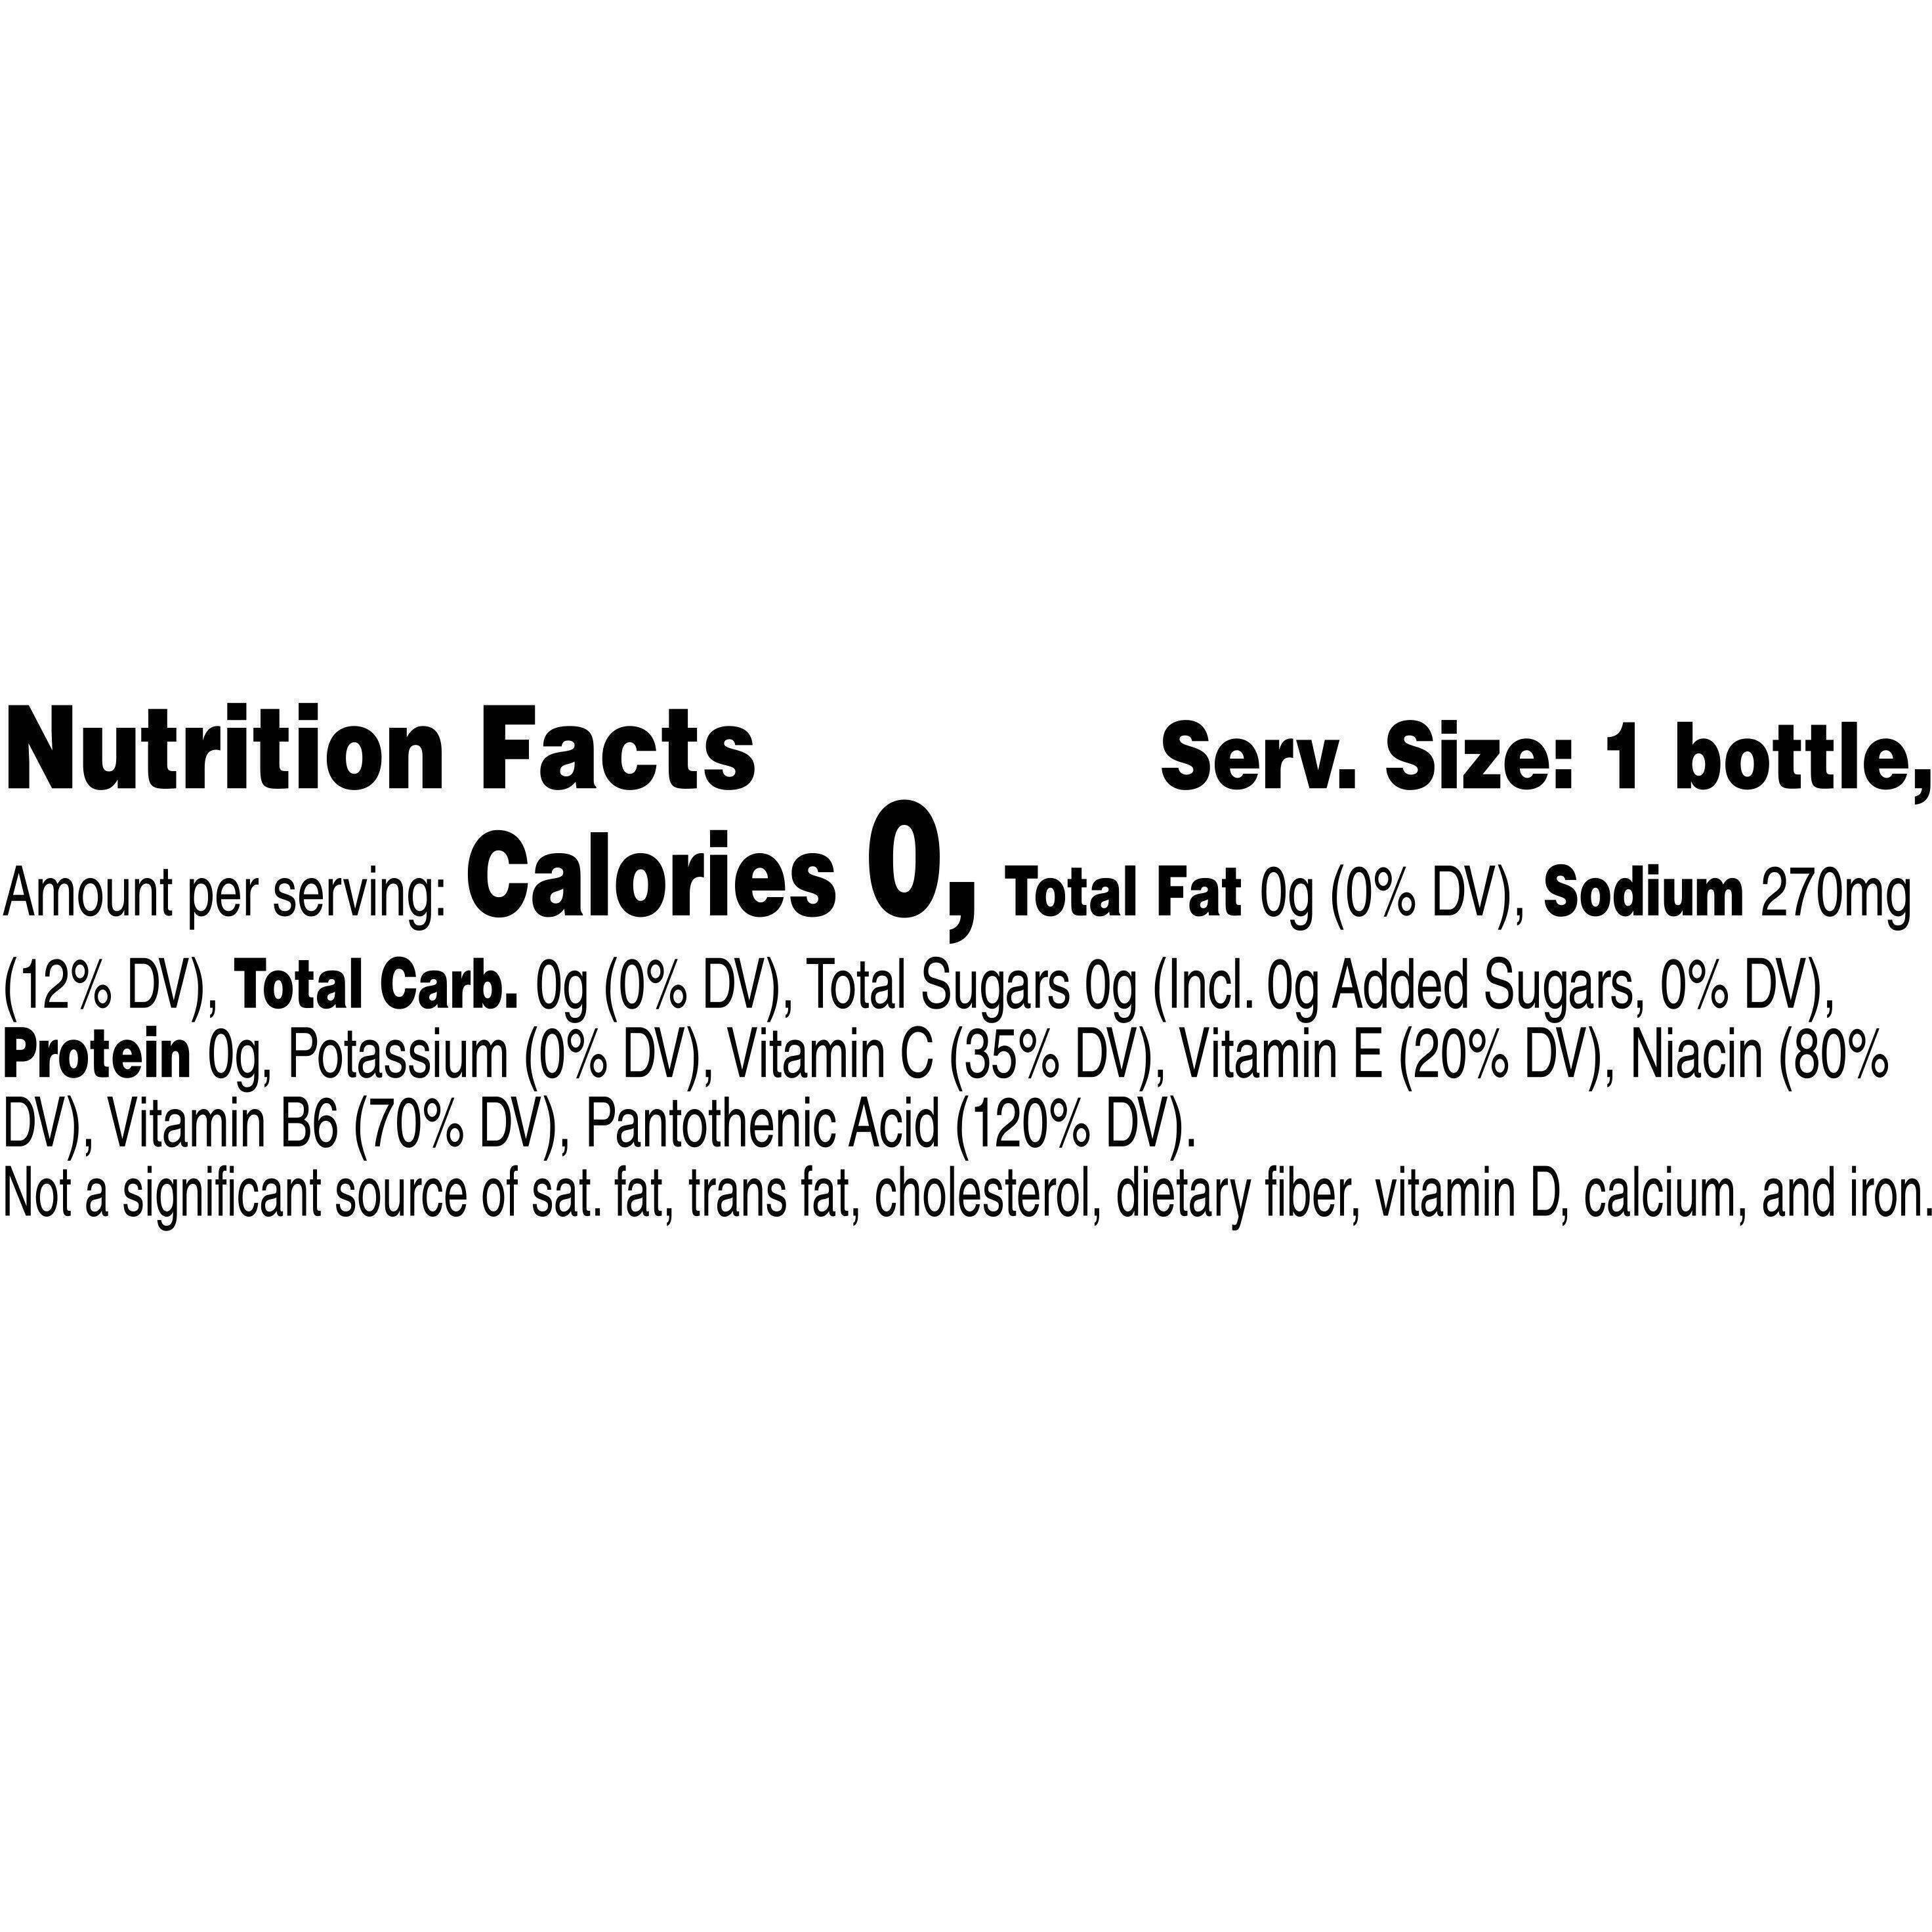 Image describing nutrition information for product Propel Berry